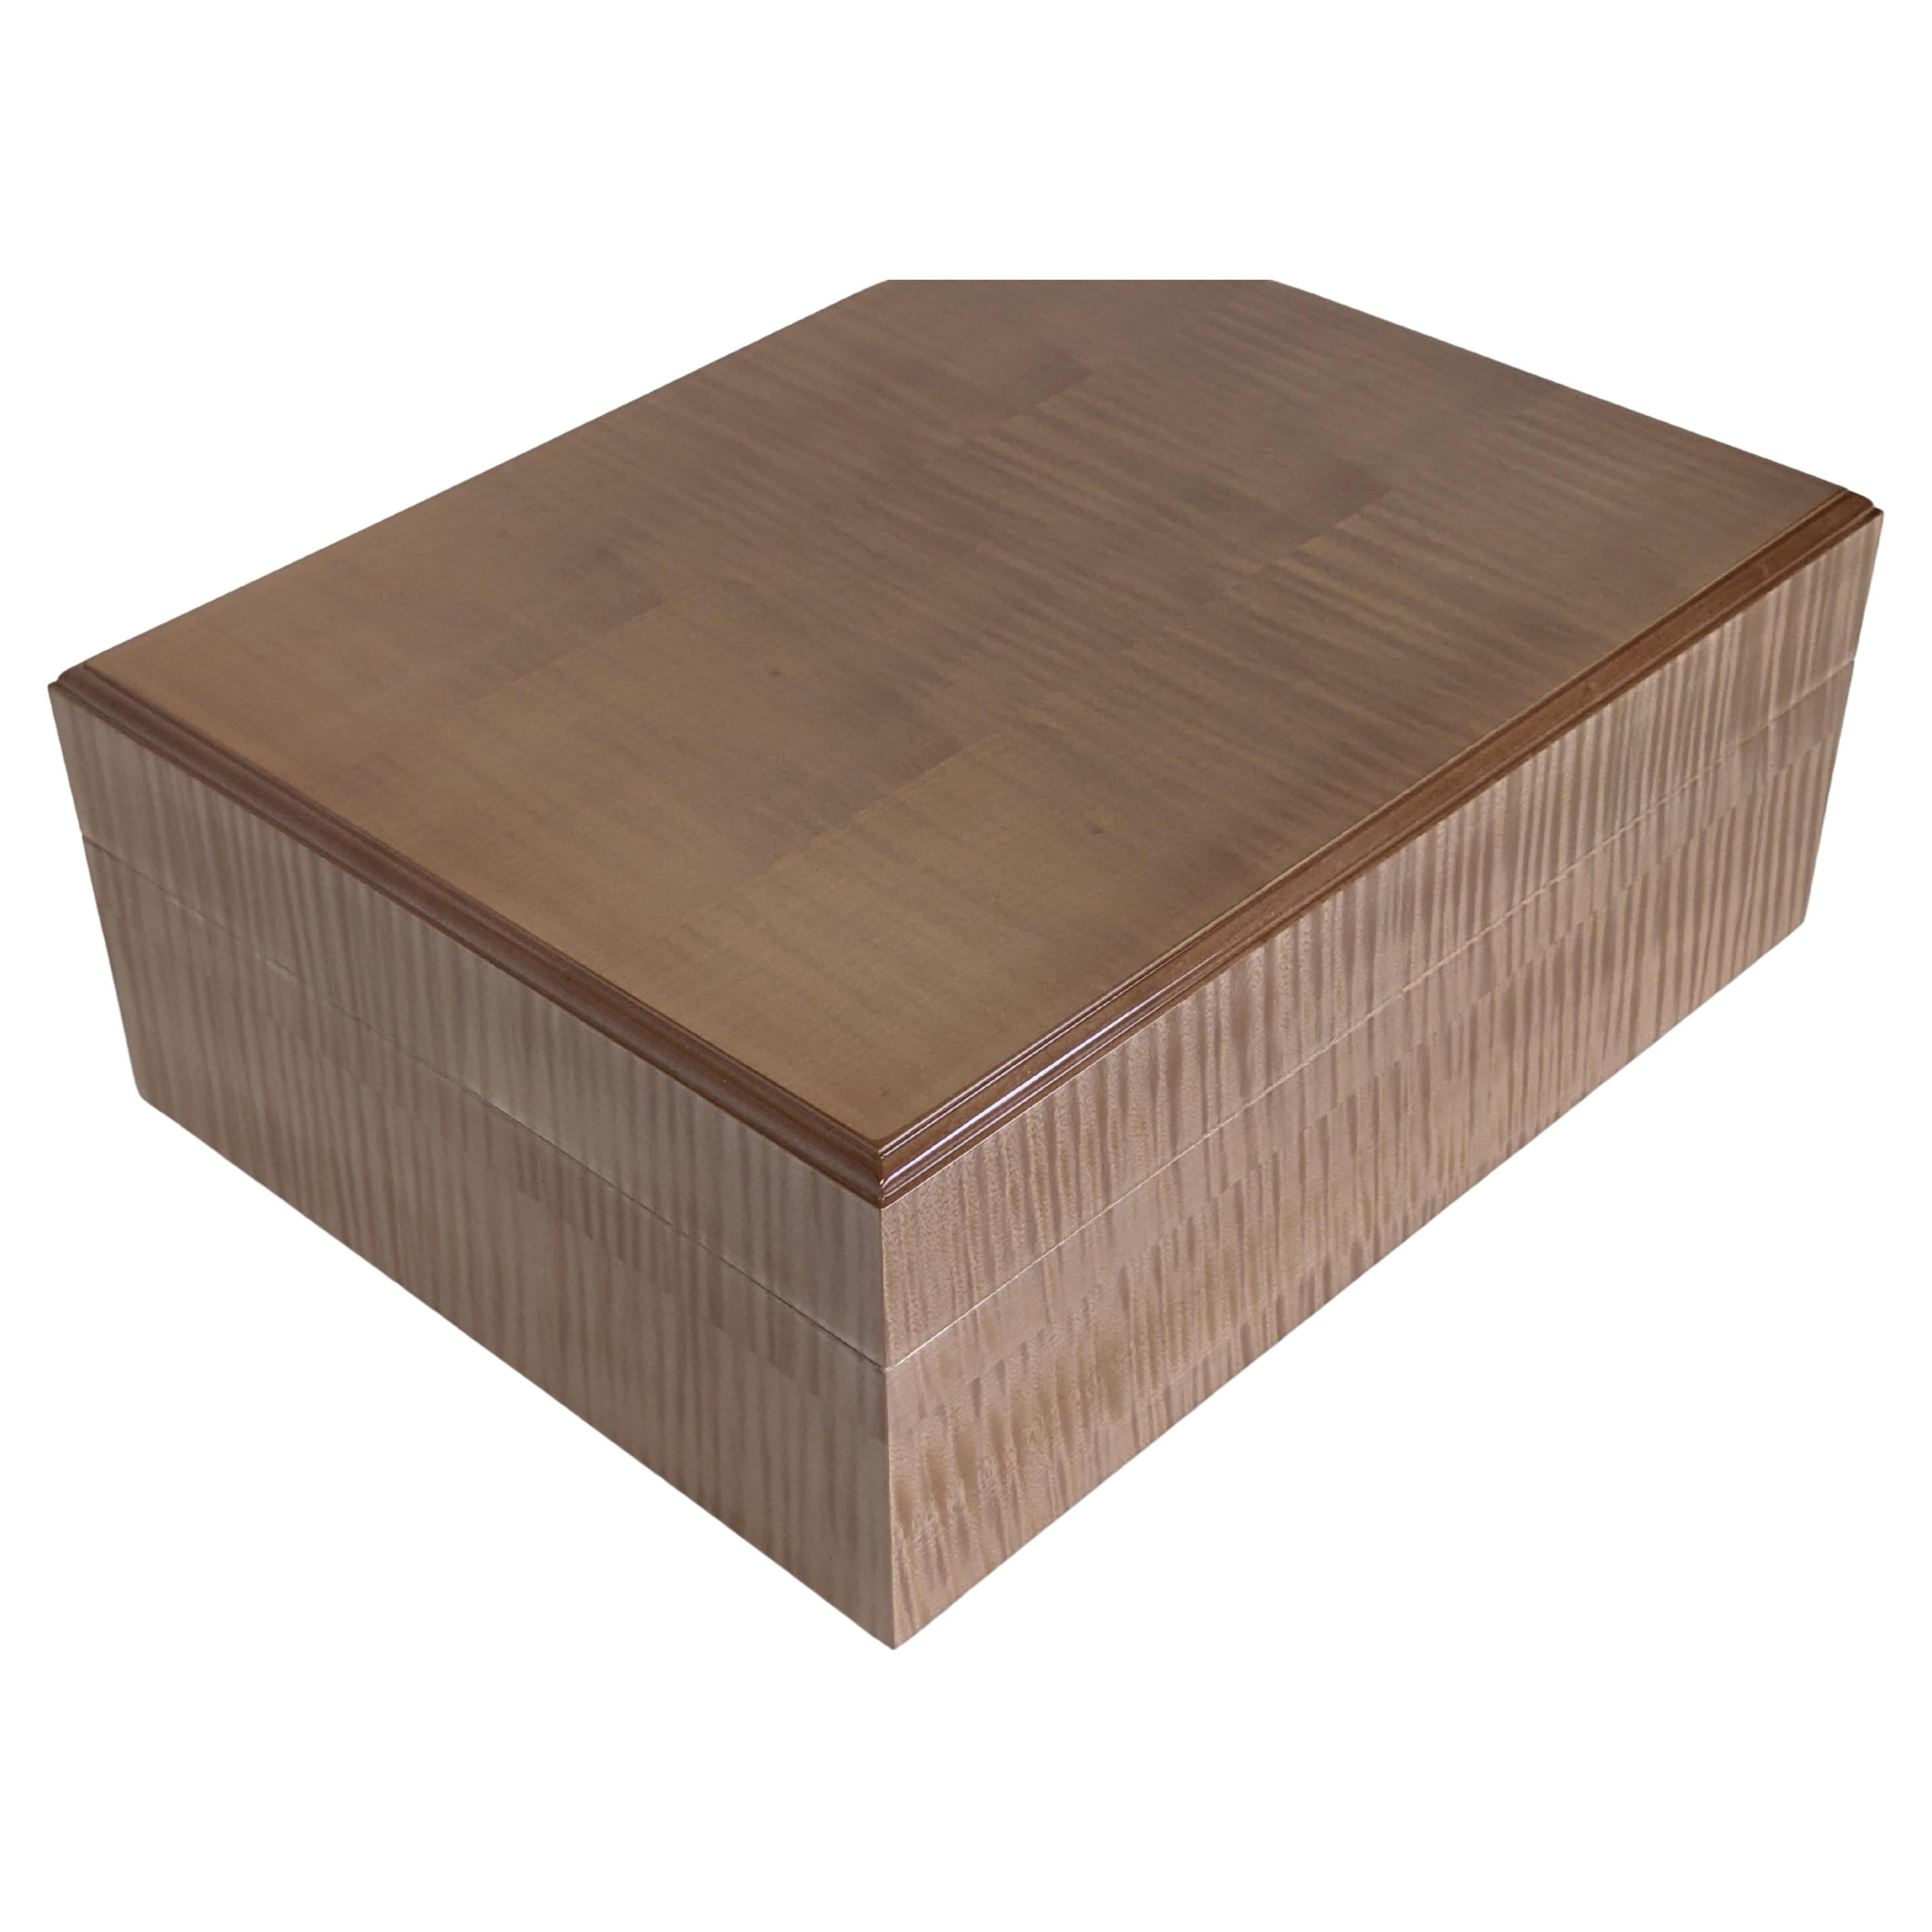 A luxurious humidor, hand made in selected ripple sycamore veneer. With solid sycamore edge mouldings, and sides. The outside of the box is finished in a full gloss, hand burnished lacquer, with a slight pink tint to the colour. The sycamore inside